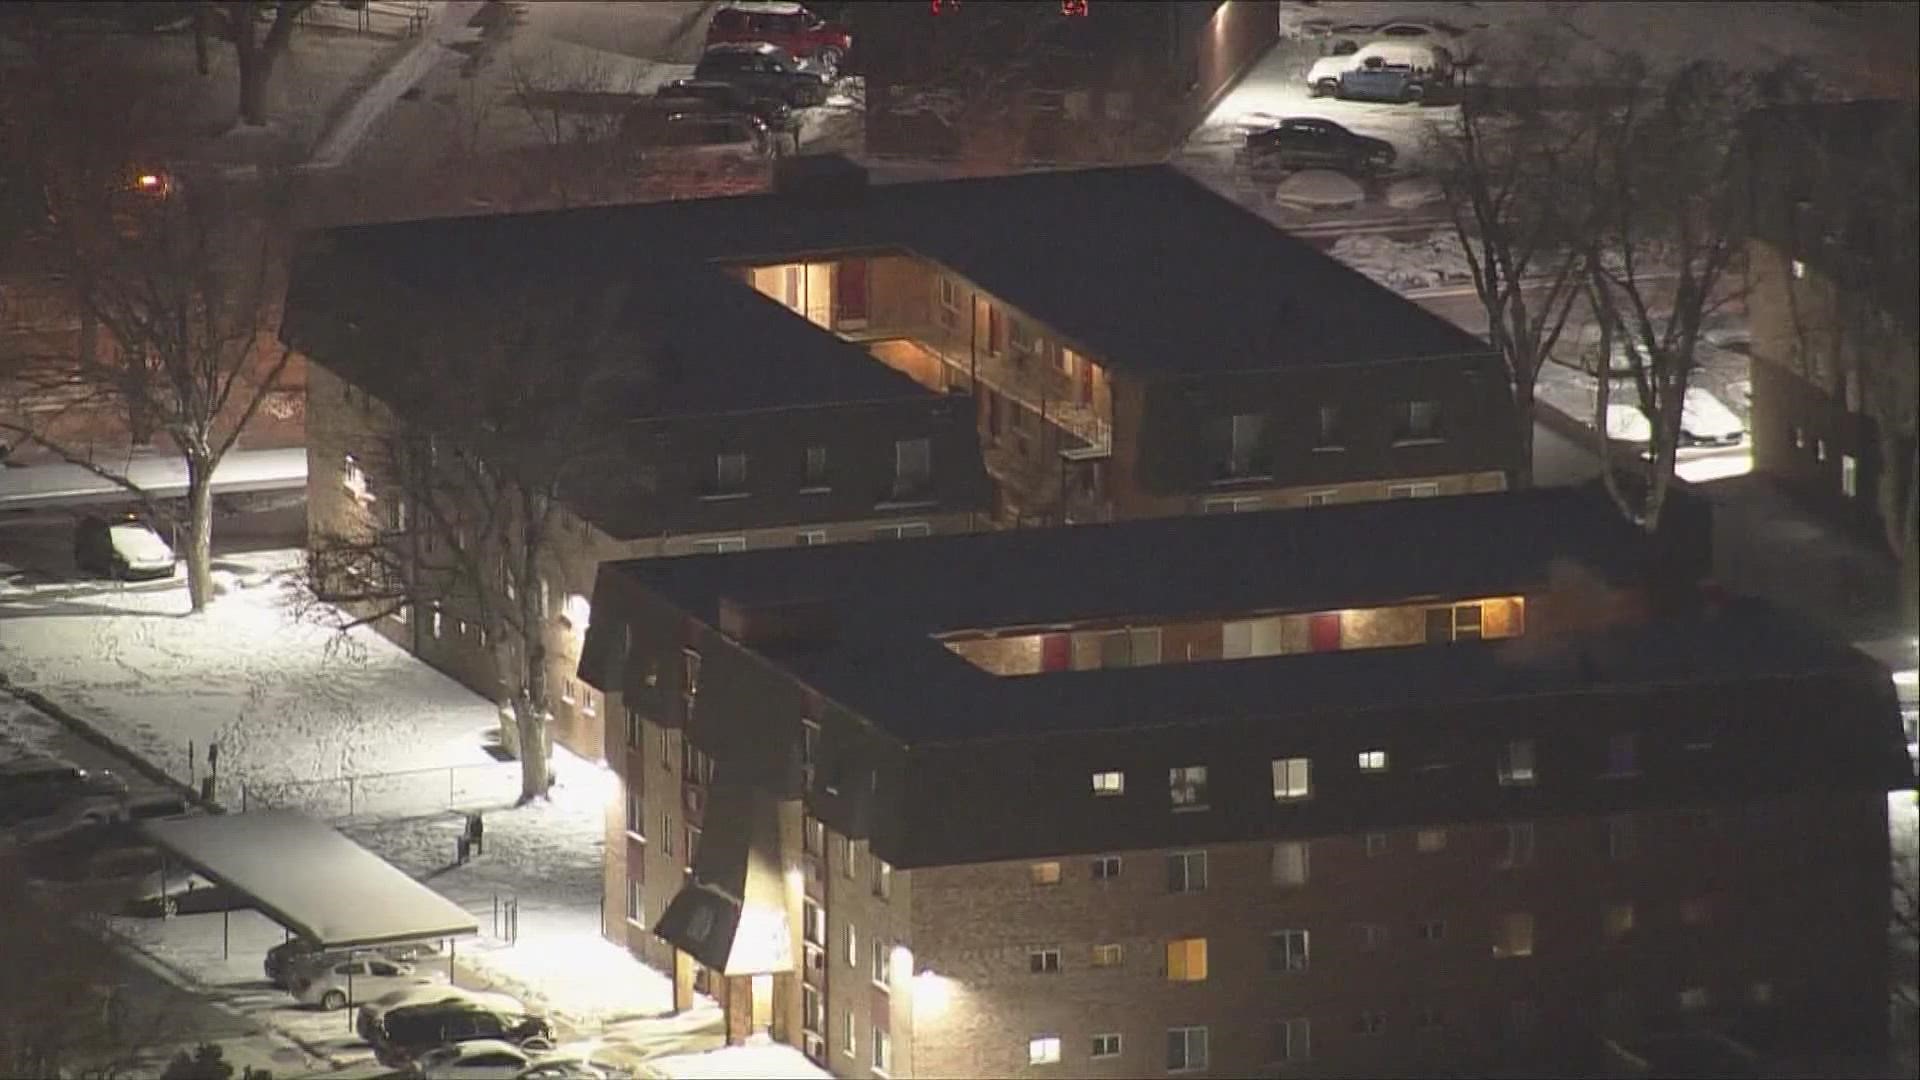 The victim was pronounced dead Thursday night at an apartment complex near East 118th Avenue and Washington Street.